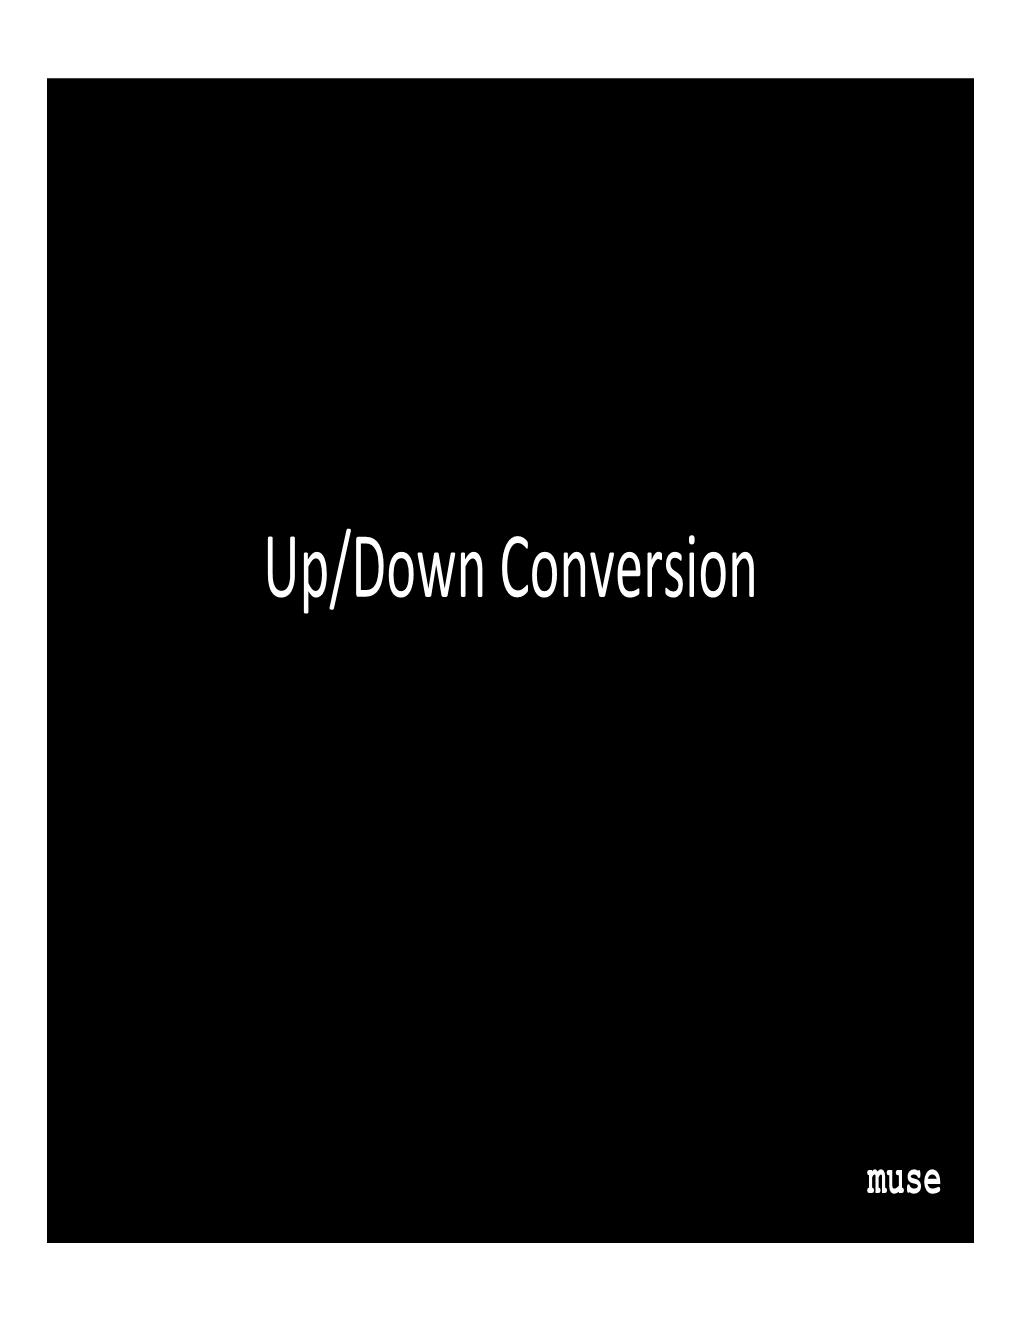 Up/Down Conversion